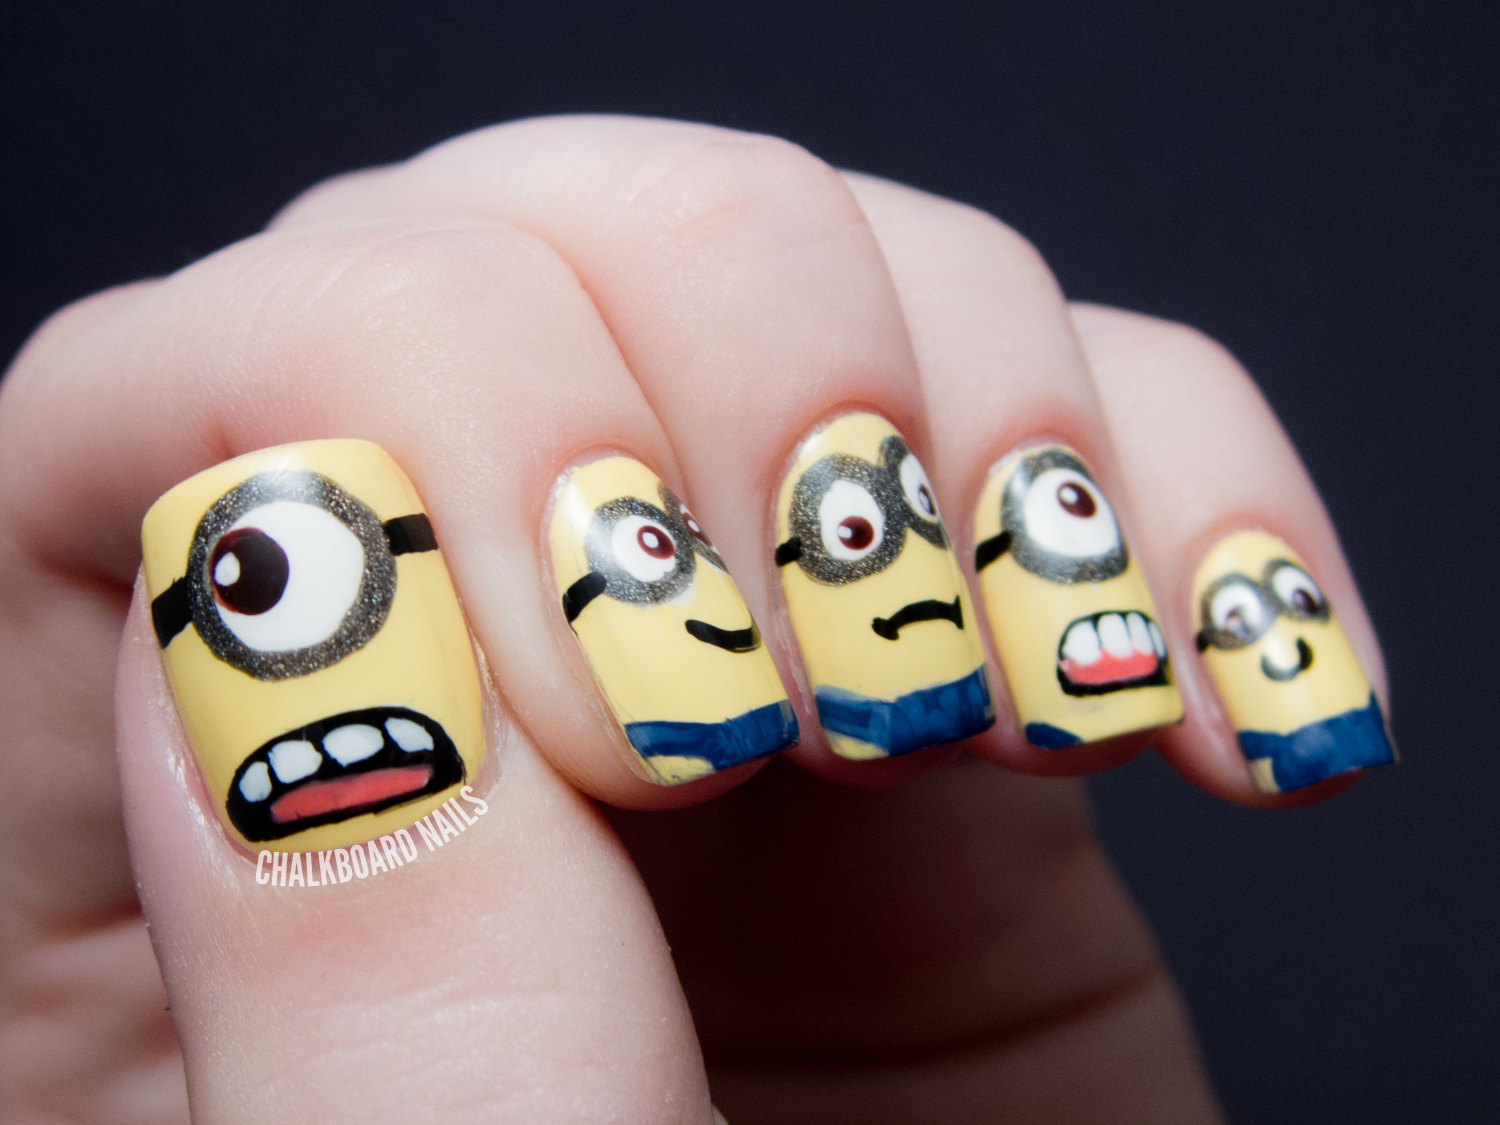 10. "Minion Nail Art with 3D Accents" by cutepolish - wide 4